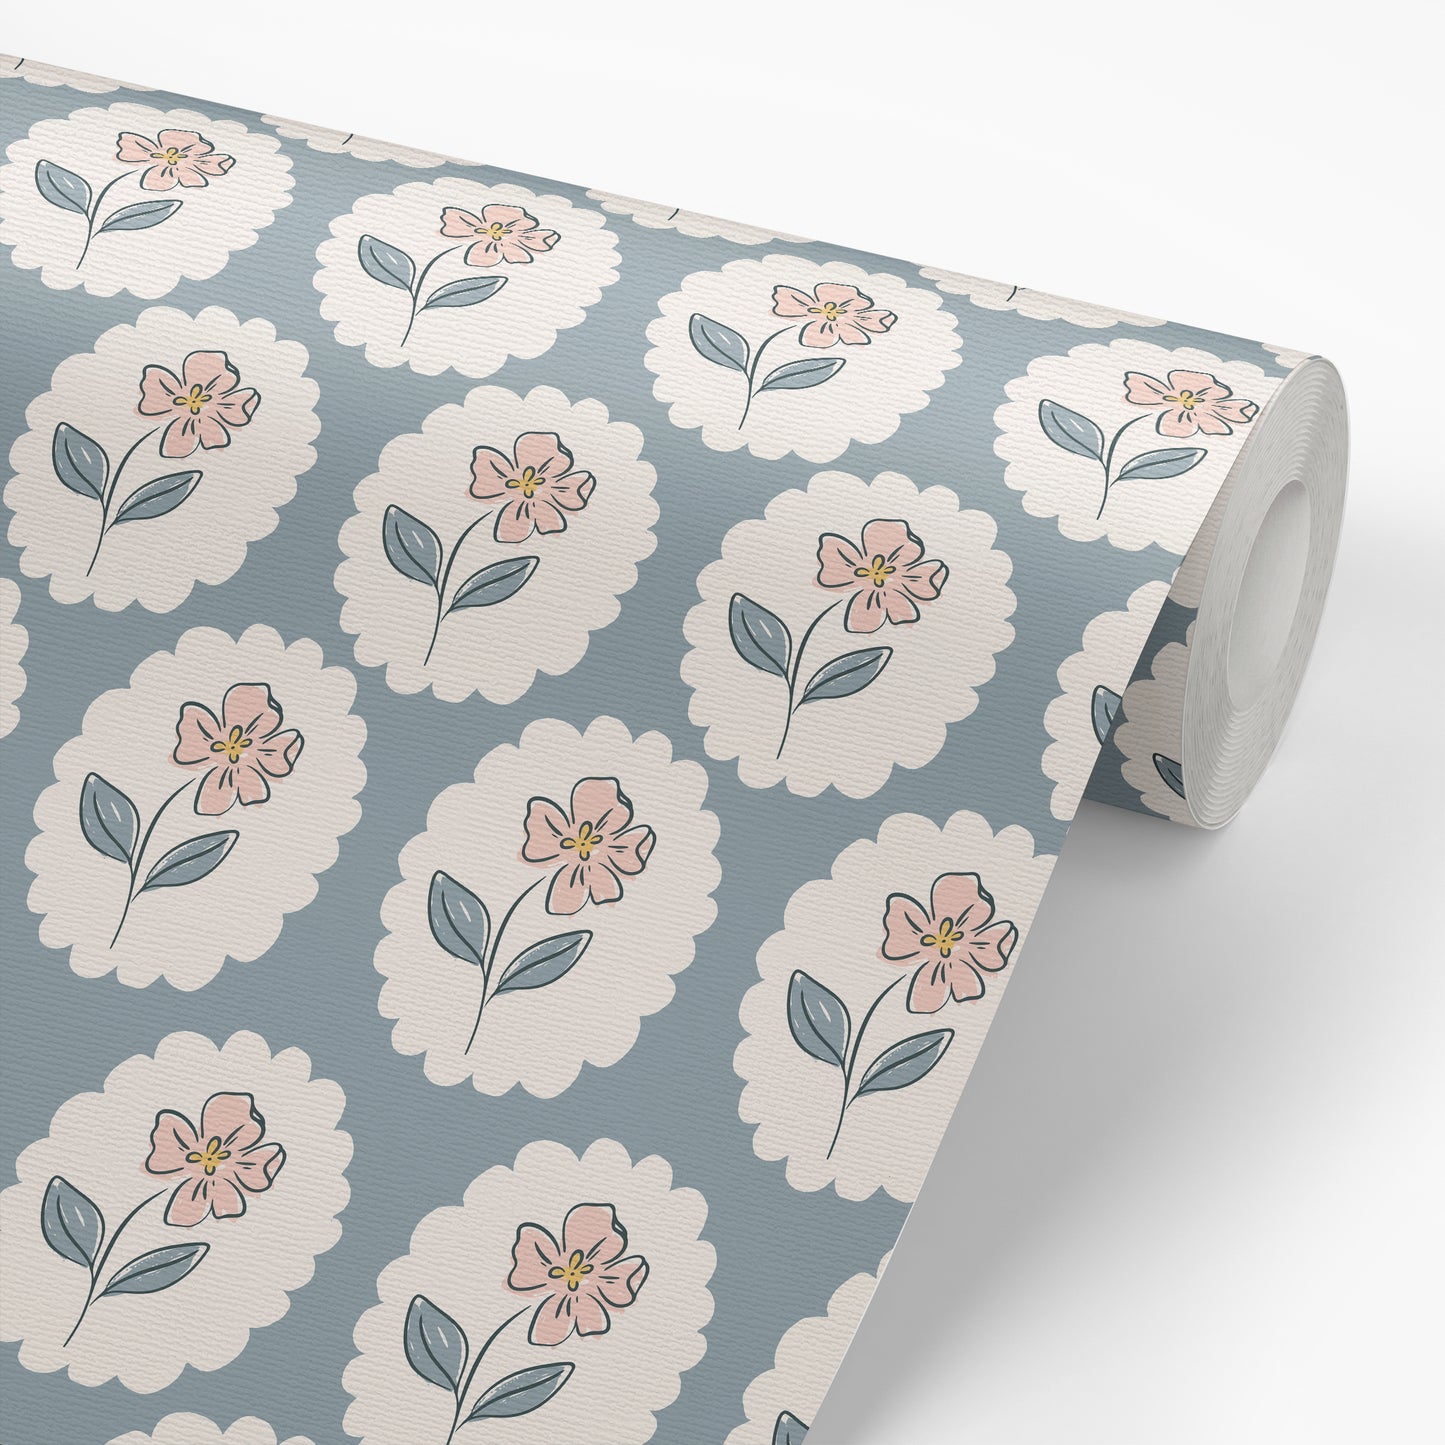 Wallpaper Roll featuring Dancing Petals Peel and Stick, Removable Wallpaper in Sky Blue